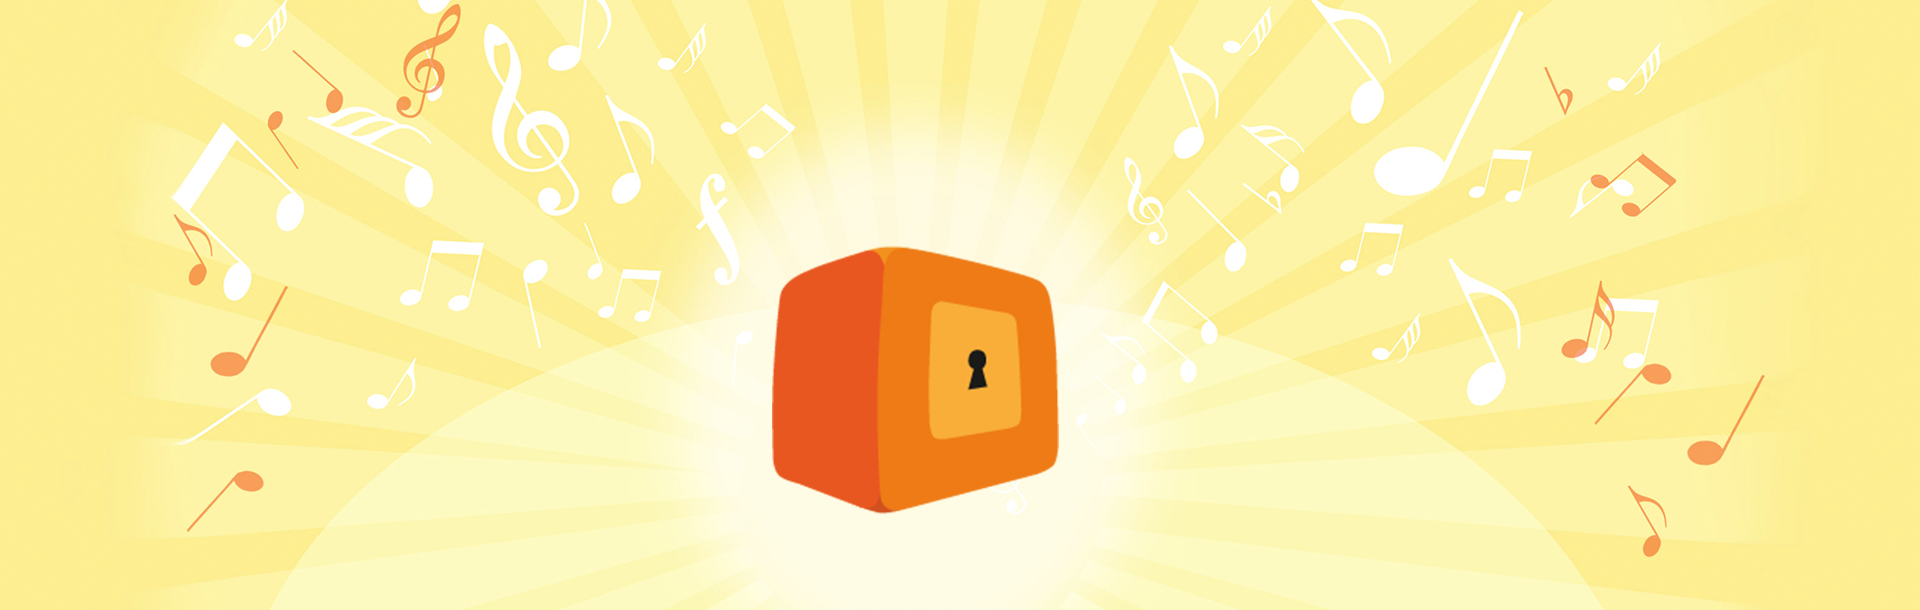 Orange lockbox over abstract yellow background with white, yellow, and orange music notes